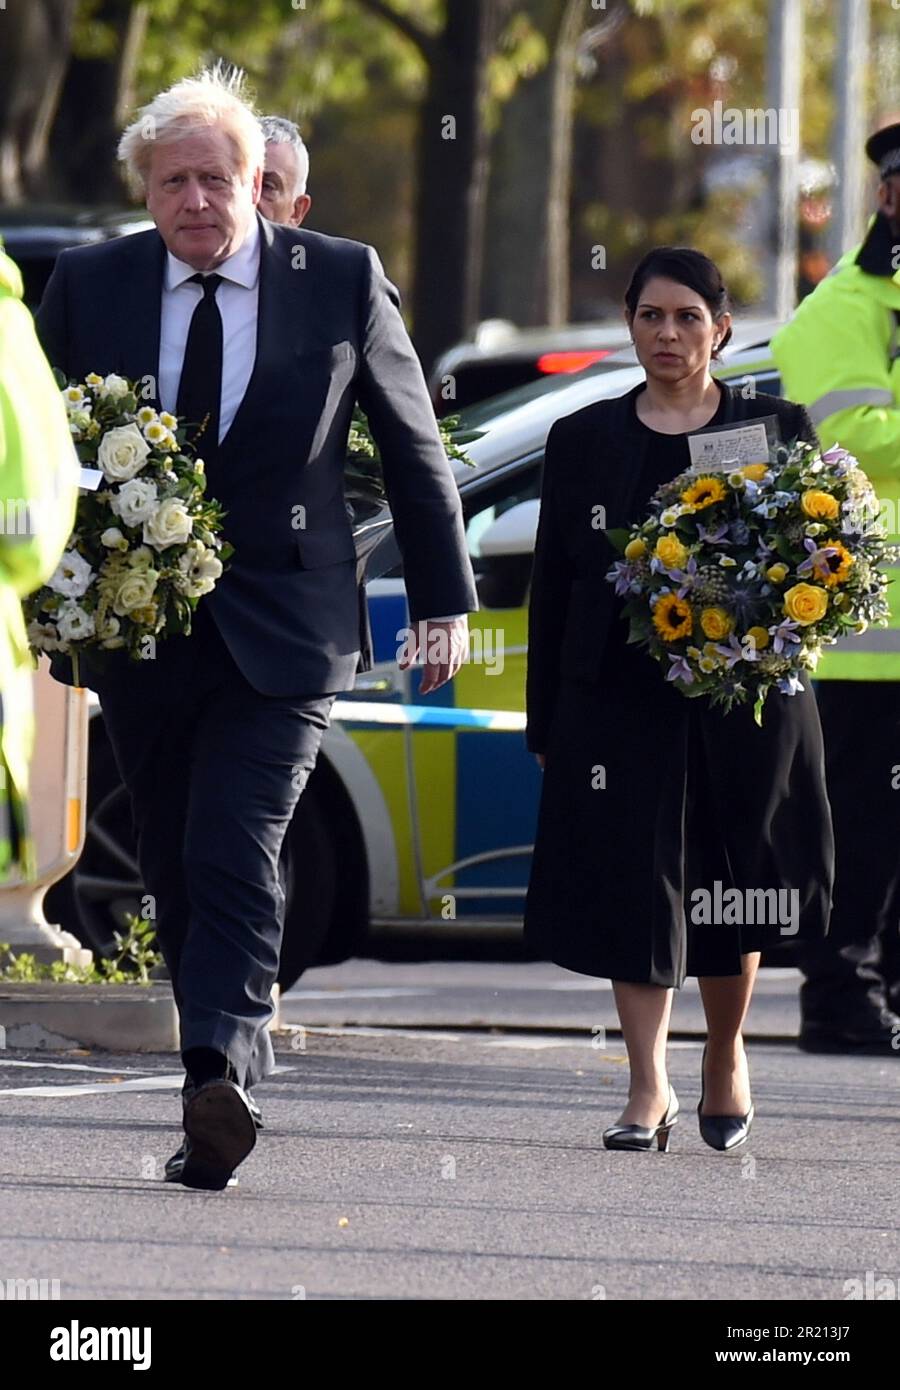 Prime Minister Boris Johnson, and Home Secretary Priti Patel, lay floral tributes near Belfairs Methodist Church in Eastwood Road North, Leigh on Sea, Southend on Sea, Essex after Conservative MP Sir David Amess died having being stabbed multiple times at his constituency surgery. October, 2021. Stock Photo